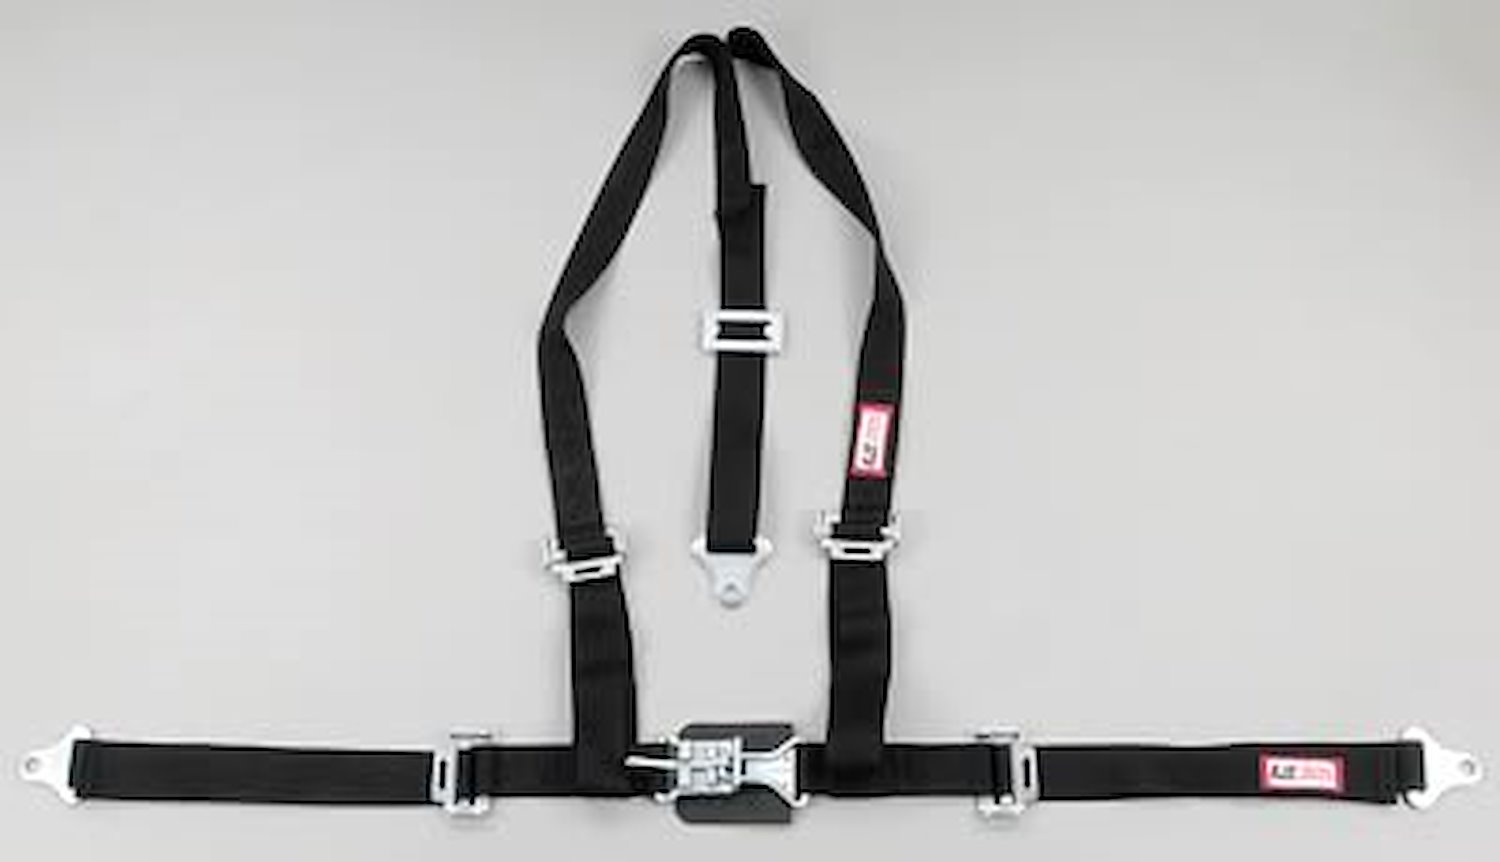 NON-SFI L&L HARNESS 3 PULL DOWN Lap BELT SEWN IN 2 S.H. Y FLOOR Mount w/STERNUM STRAP ALL WRAP ENDS YELLOW